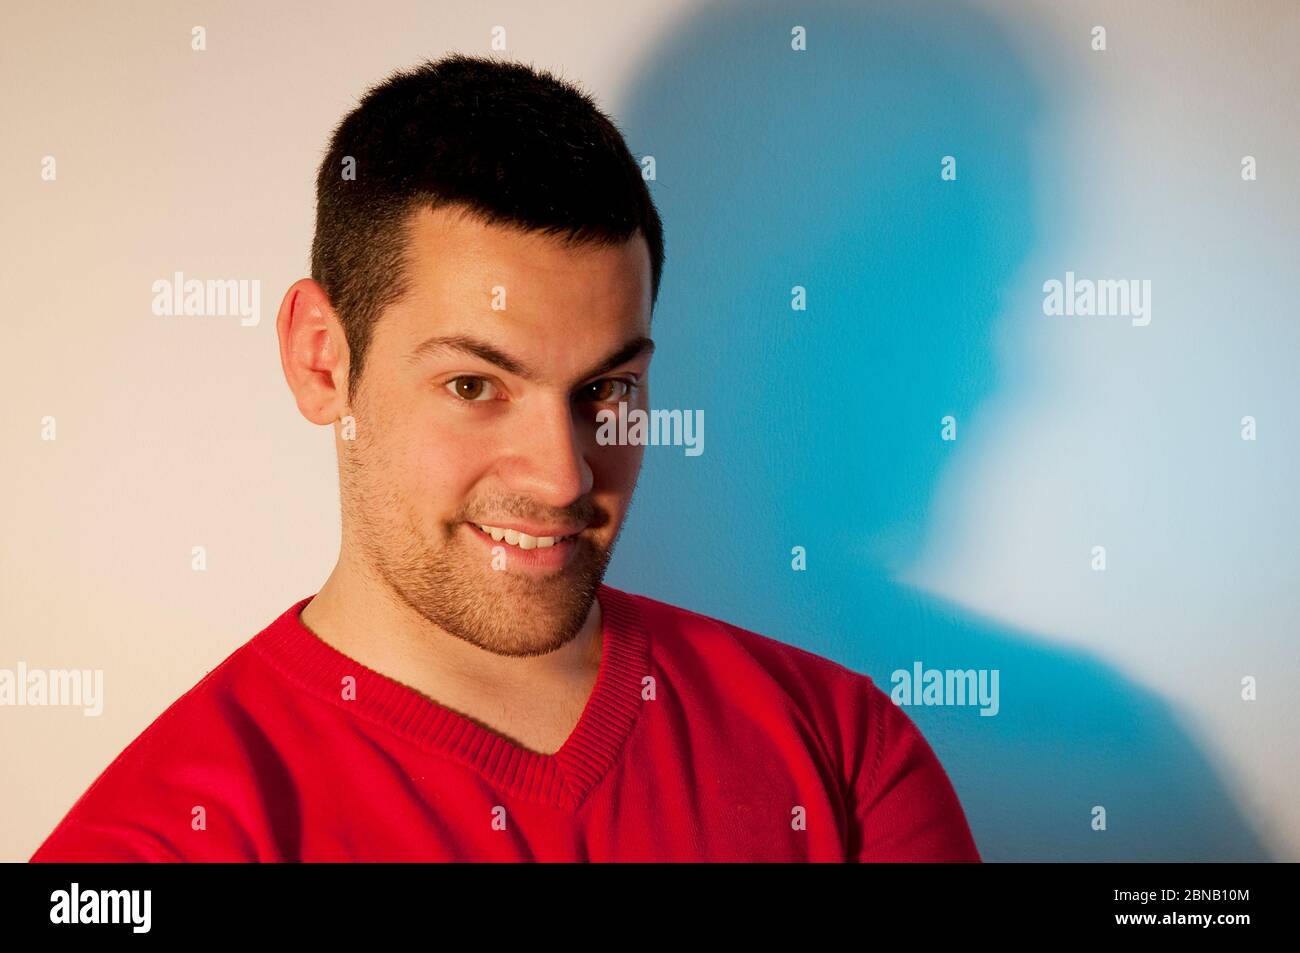 Young man smiling and looking at the camera. Stock Photo